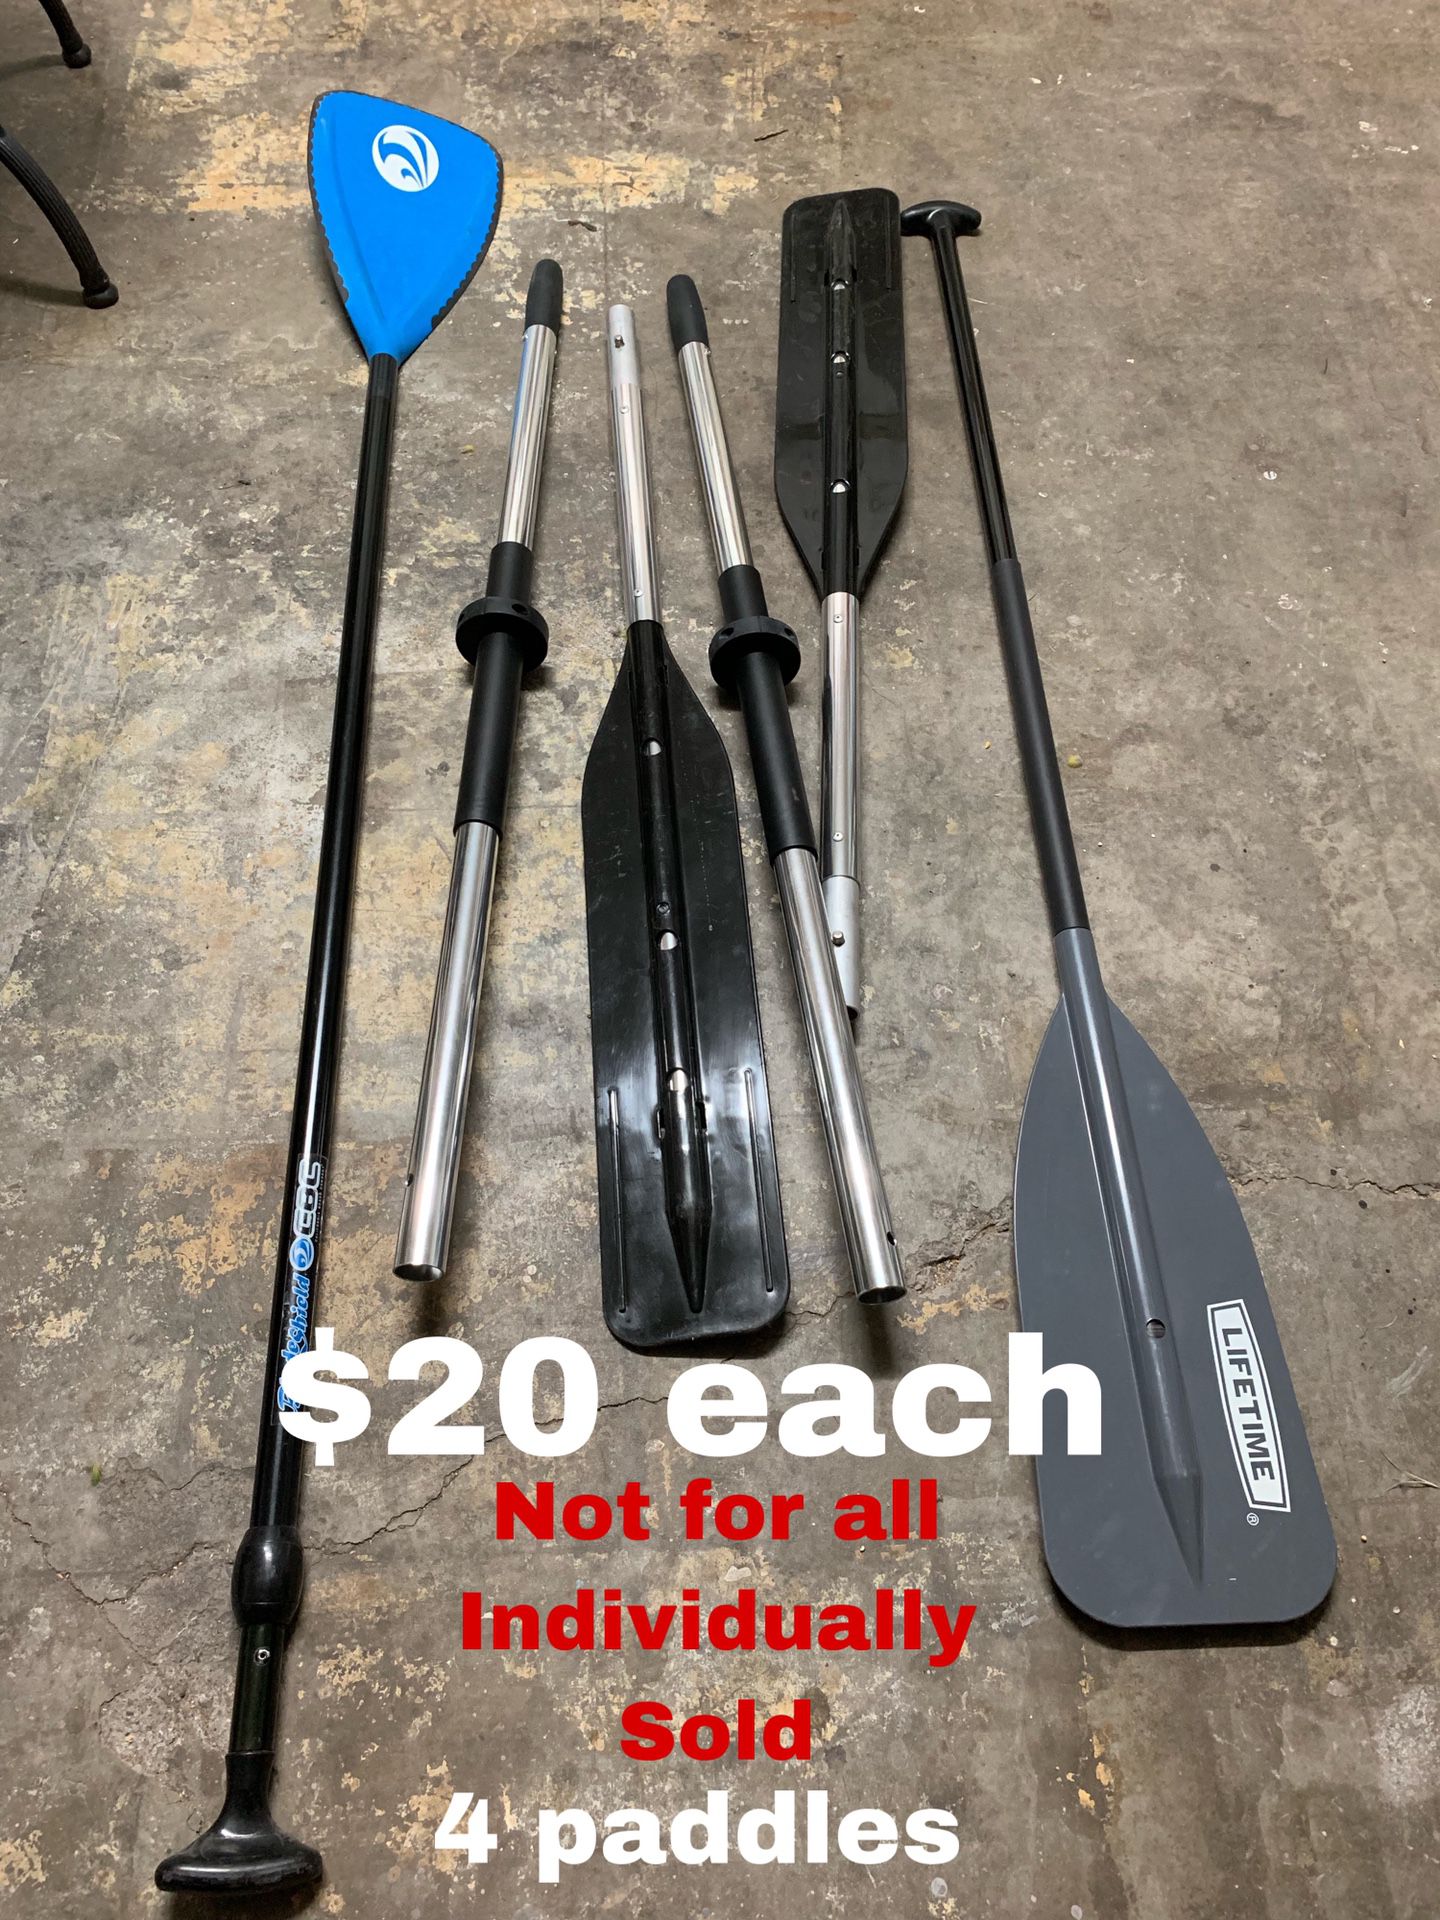 Paddles for either kayaks or paddle boards (Please Read)